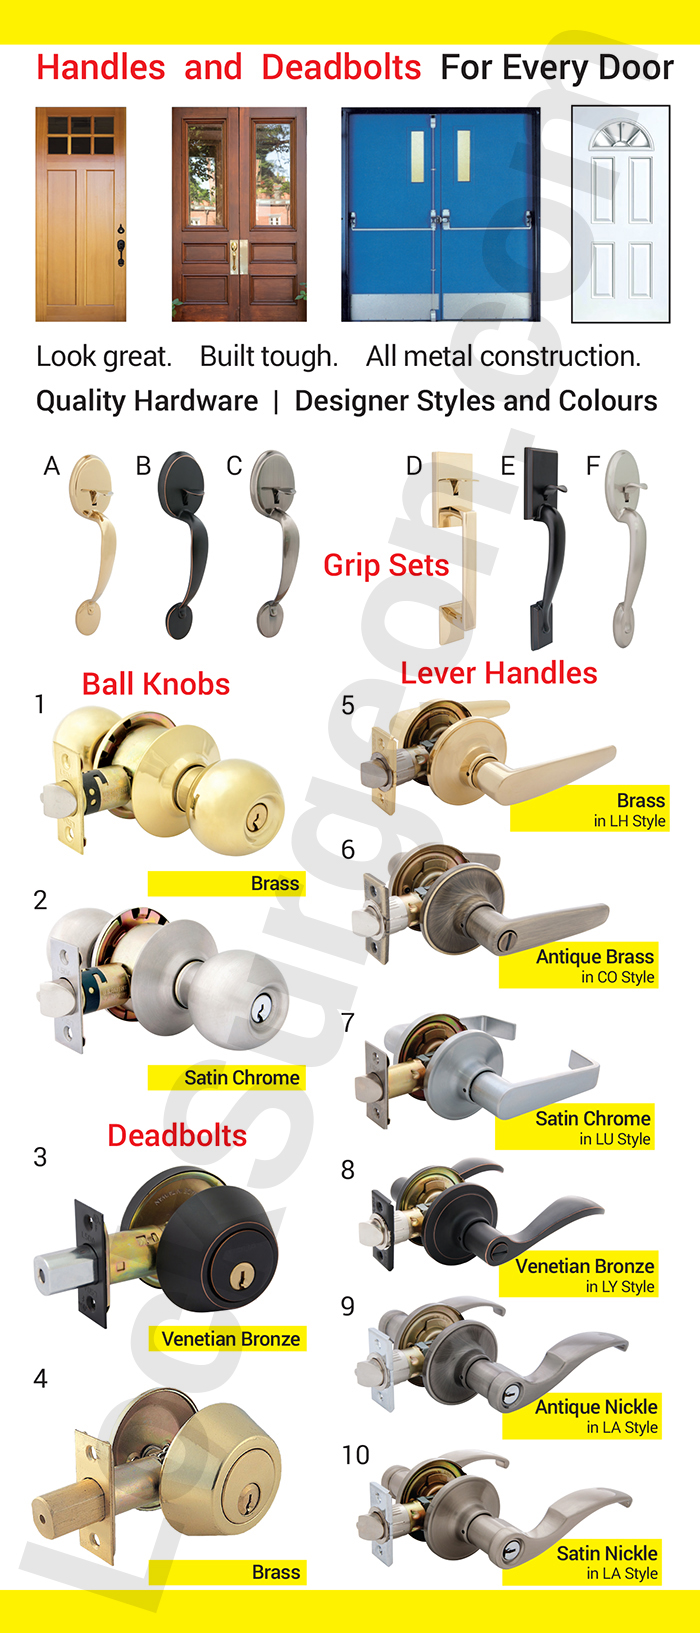 product displays for door handles levers ball-knobs latches at Calgary locksmith shop Lock Surgeon.